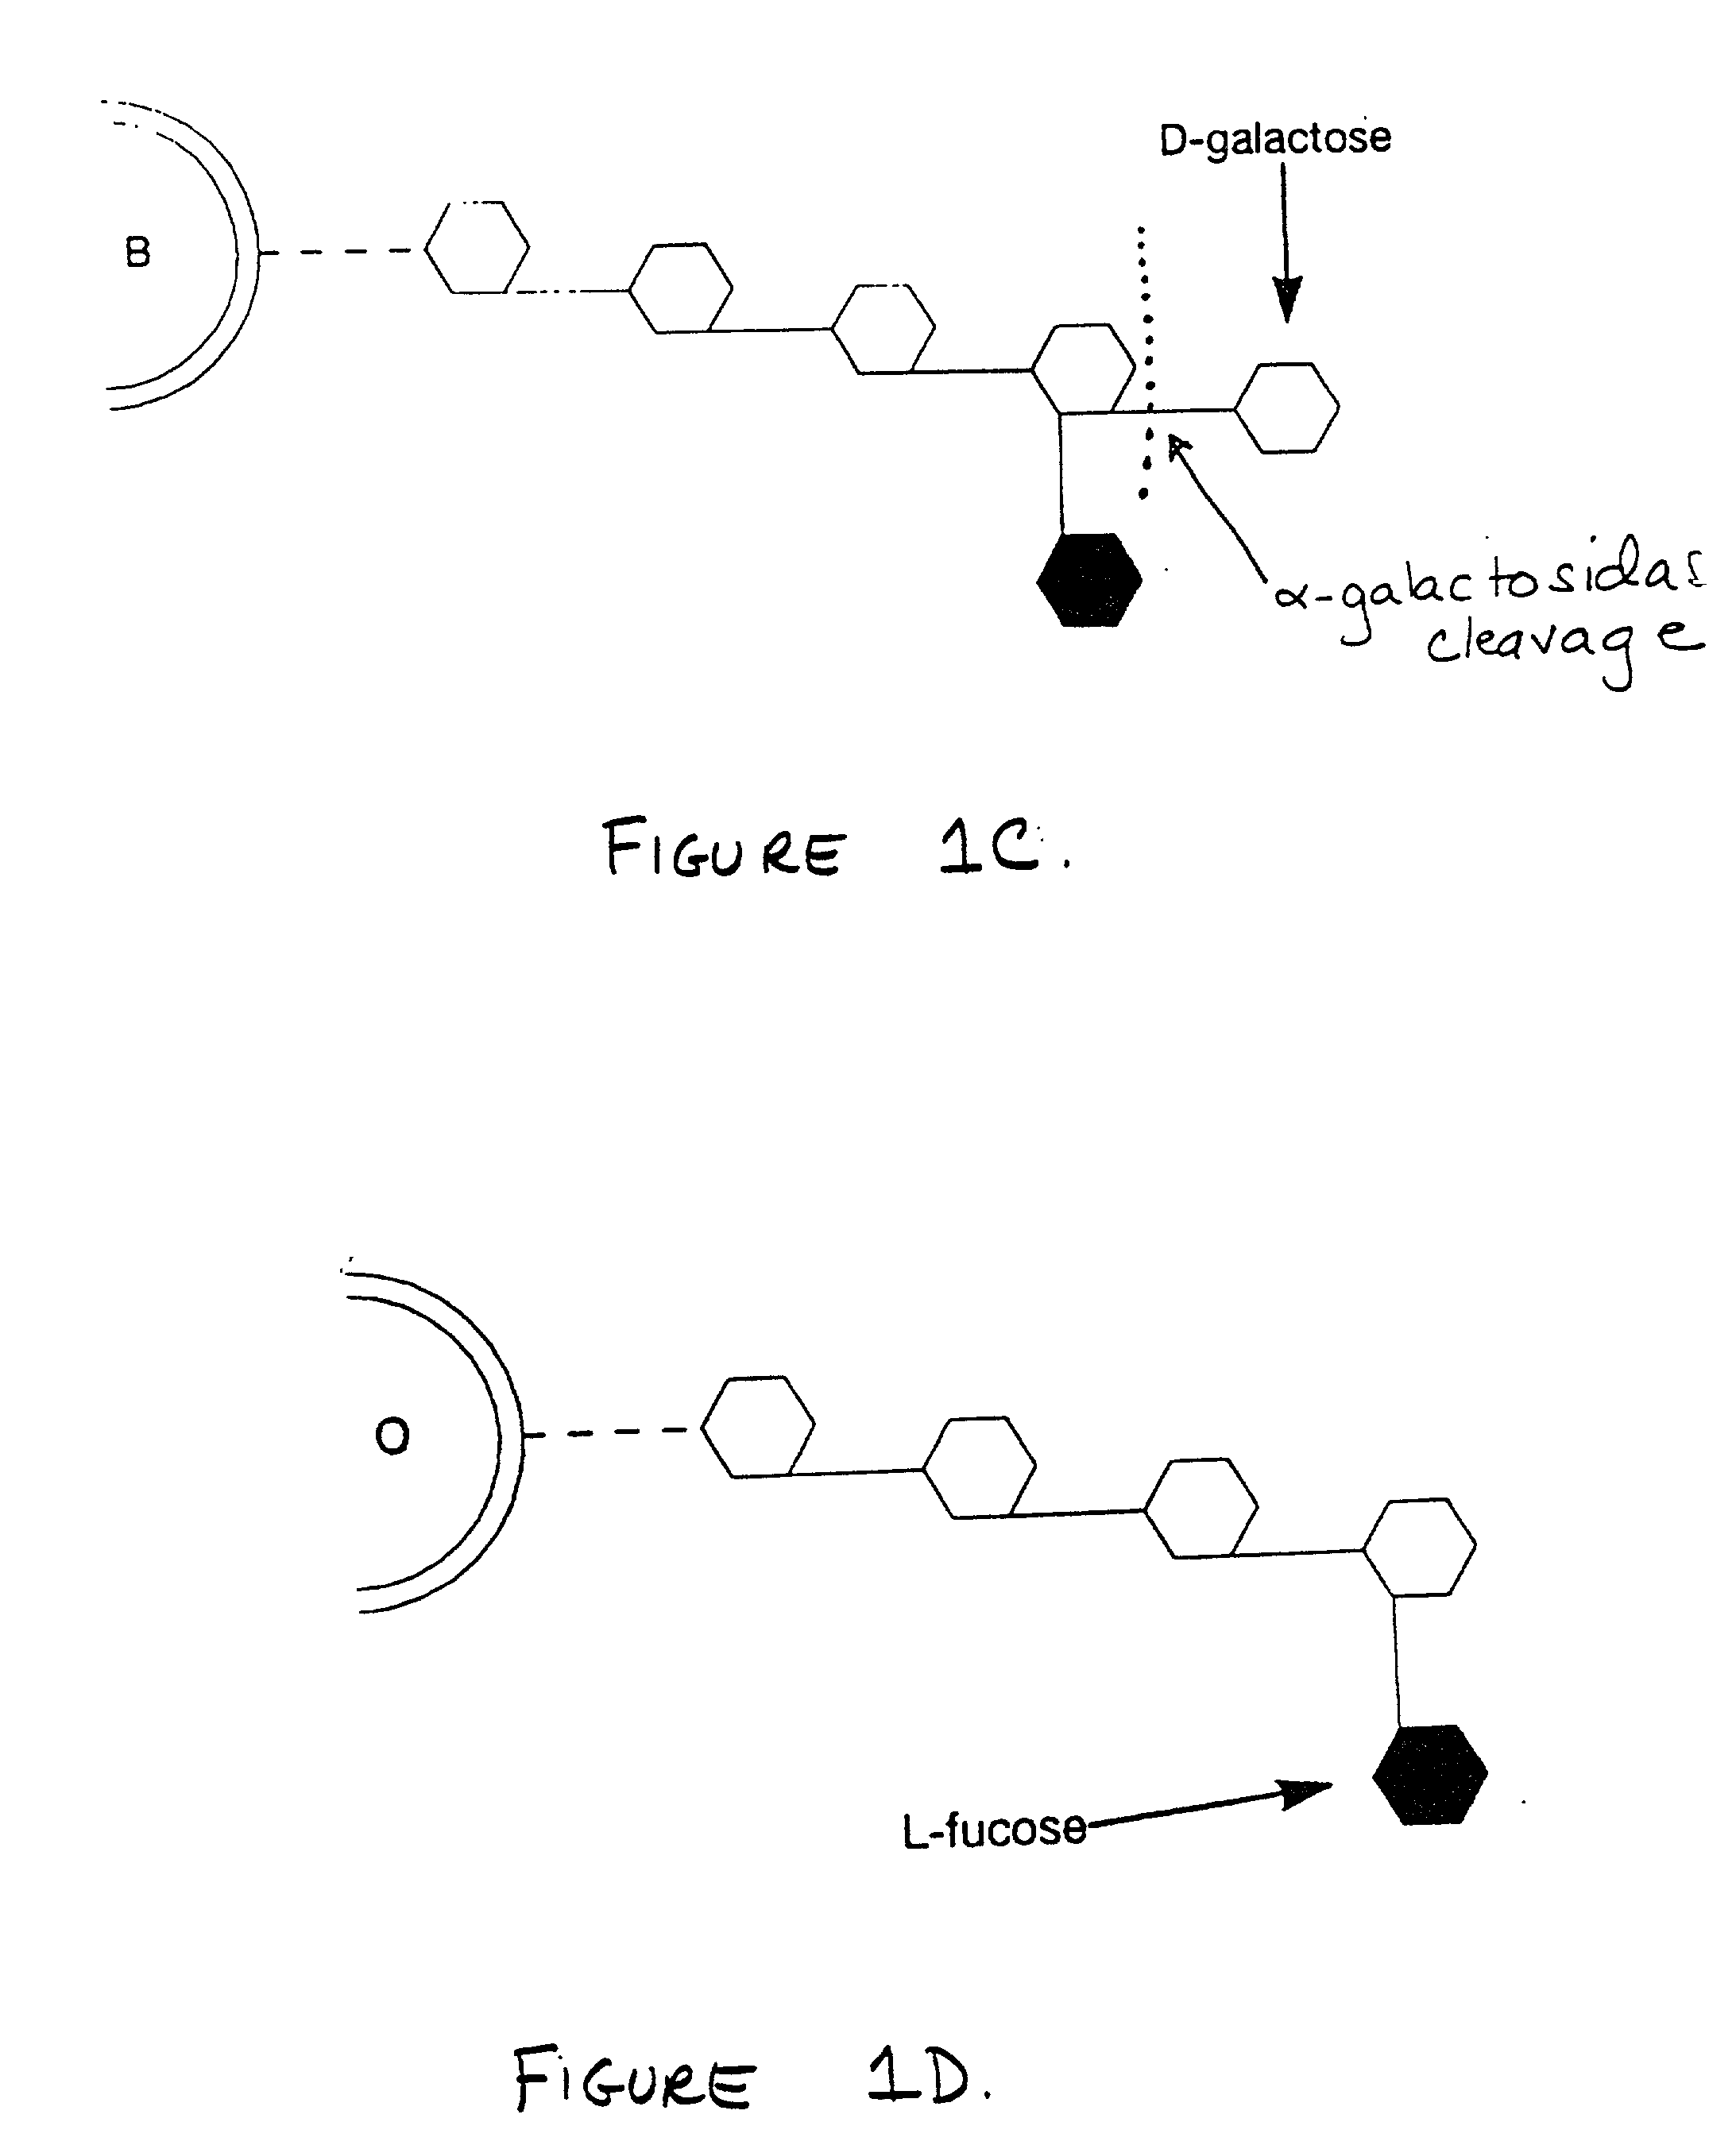 Method for conversion of blood type